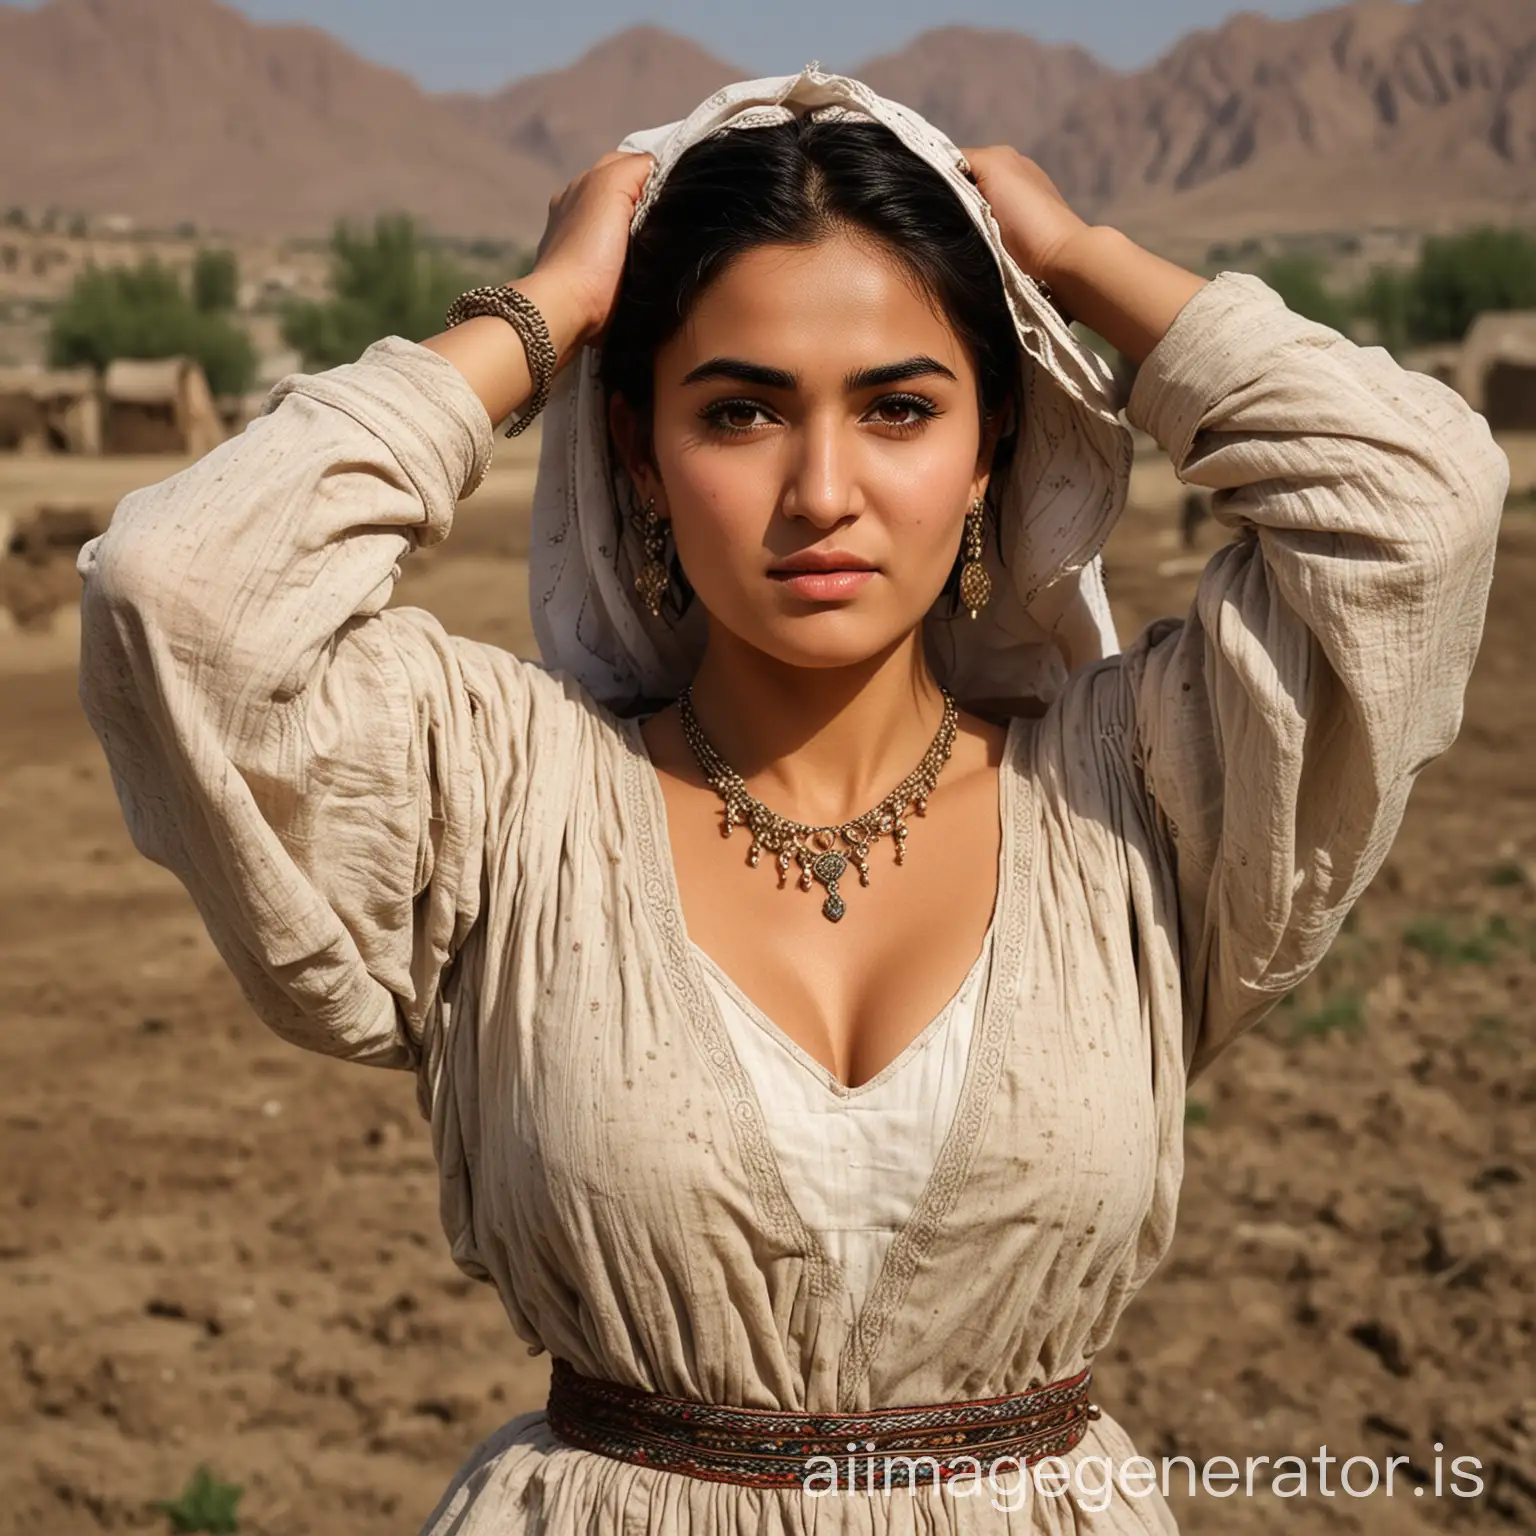 A traditional beautiful attractive Afghan Peasent women she flexing her huge fat massive-upperarms bulging bulky-builted muscular-biceps by tightening on her sleeves, on her farmland she have longer hairs, and she have dark thick eyebrows and unibrows, her breasts getting extra larger, thicker and visible